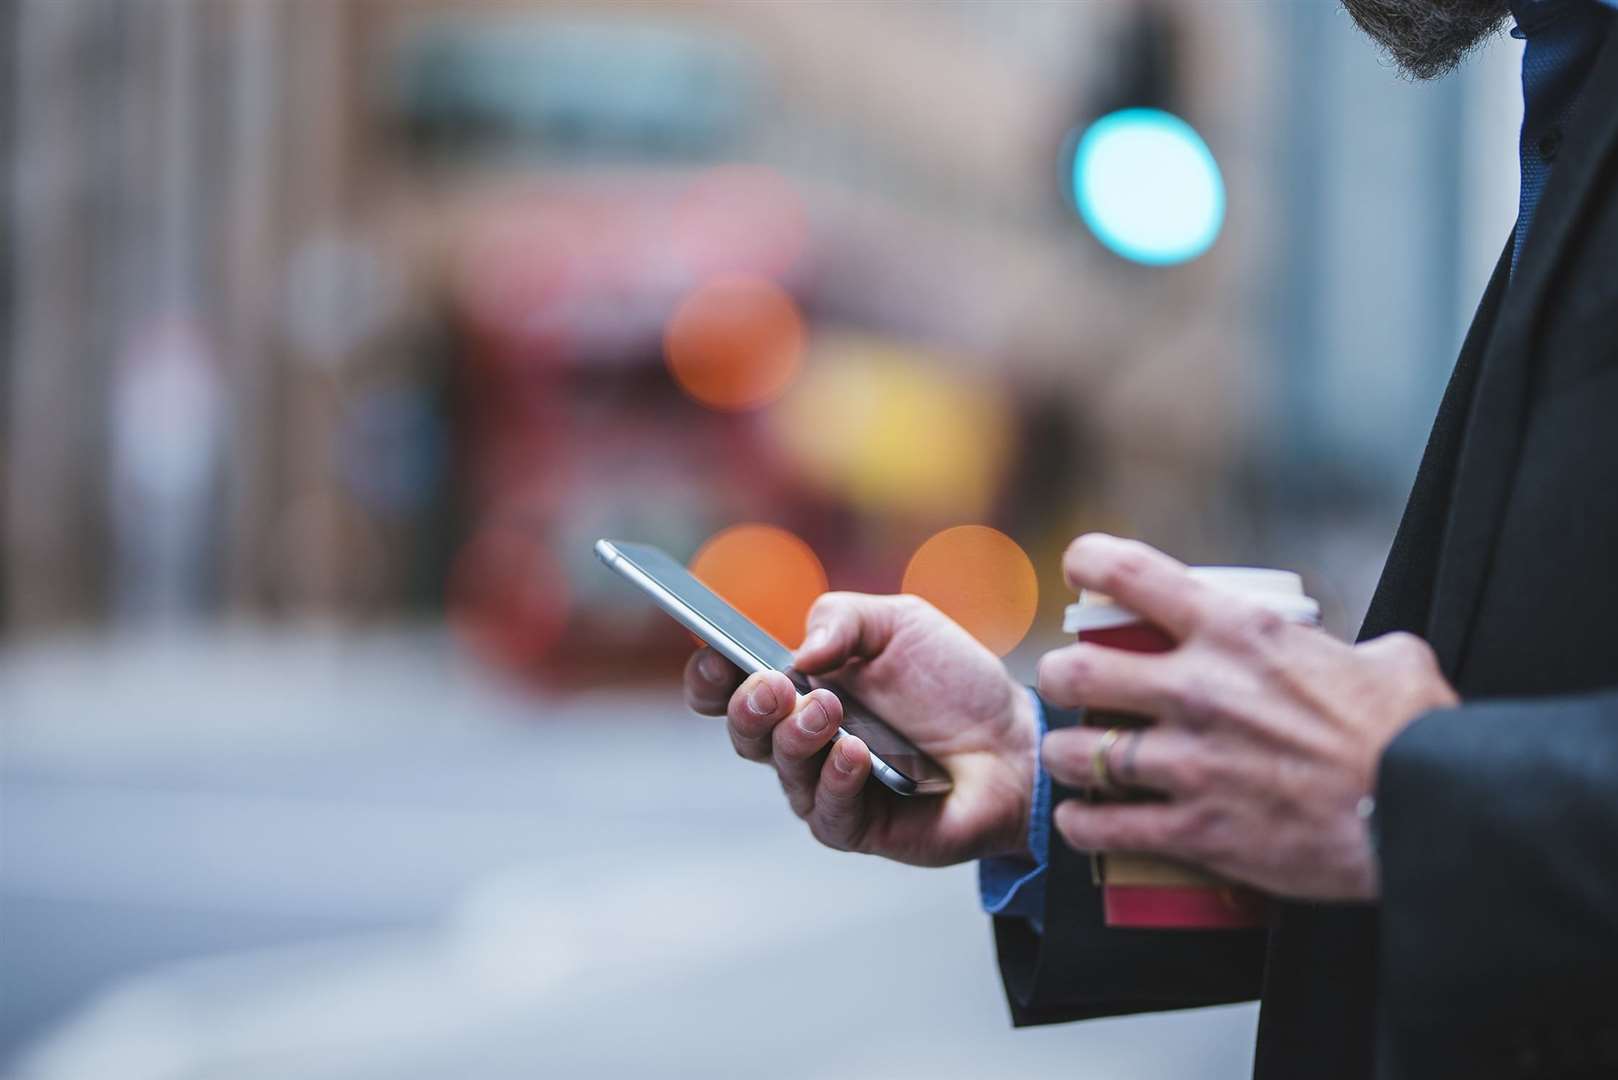 There is growing demand for faster and more reliable mobile phone coverage on the street. Photo: iStock.